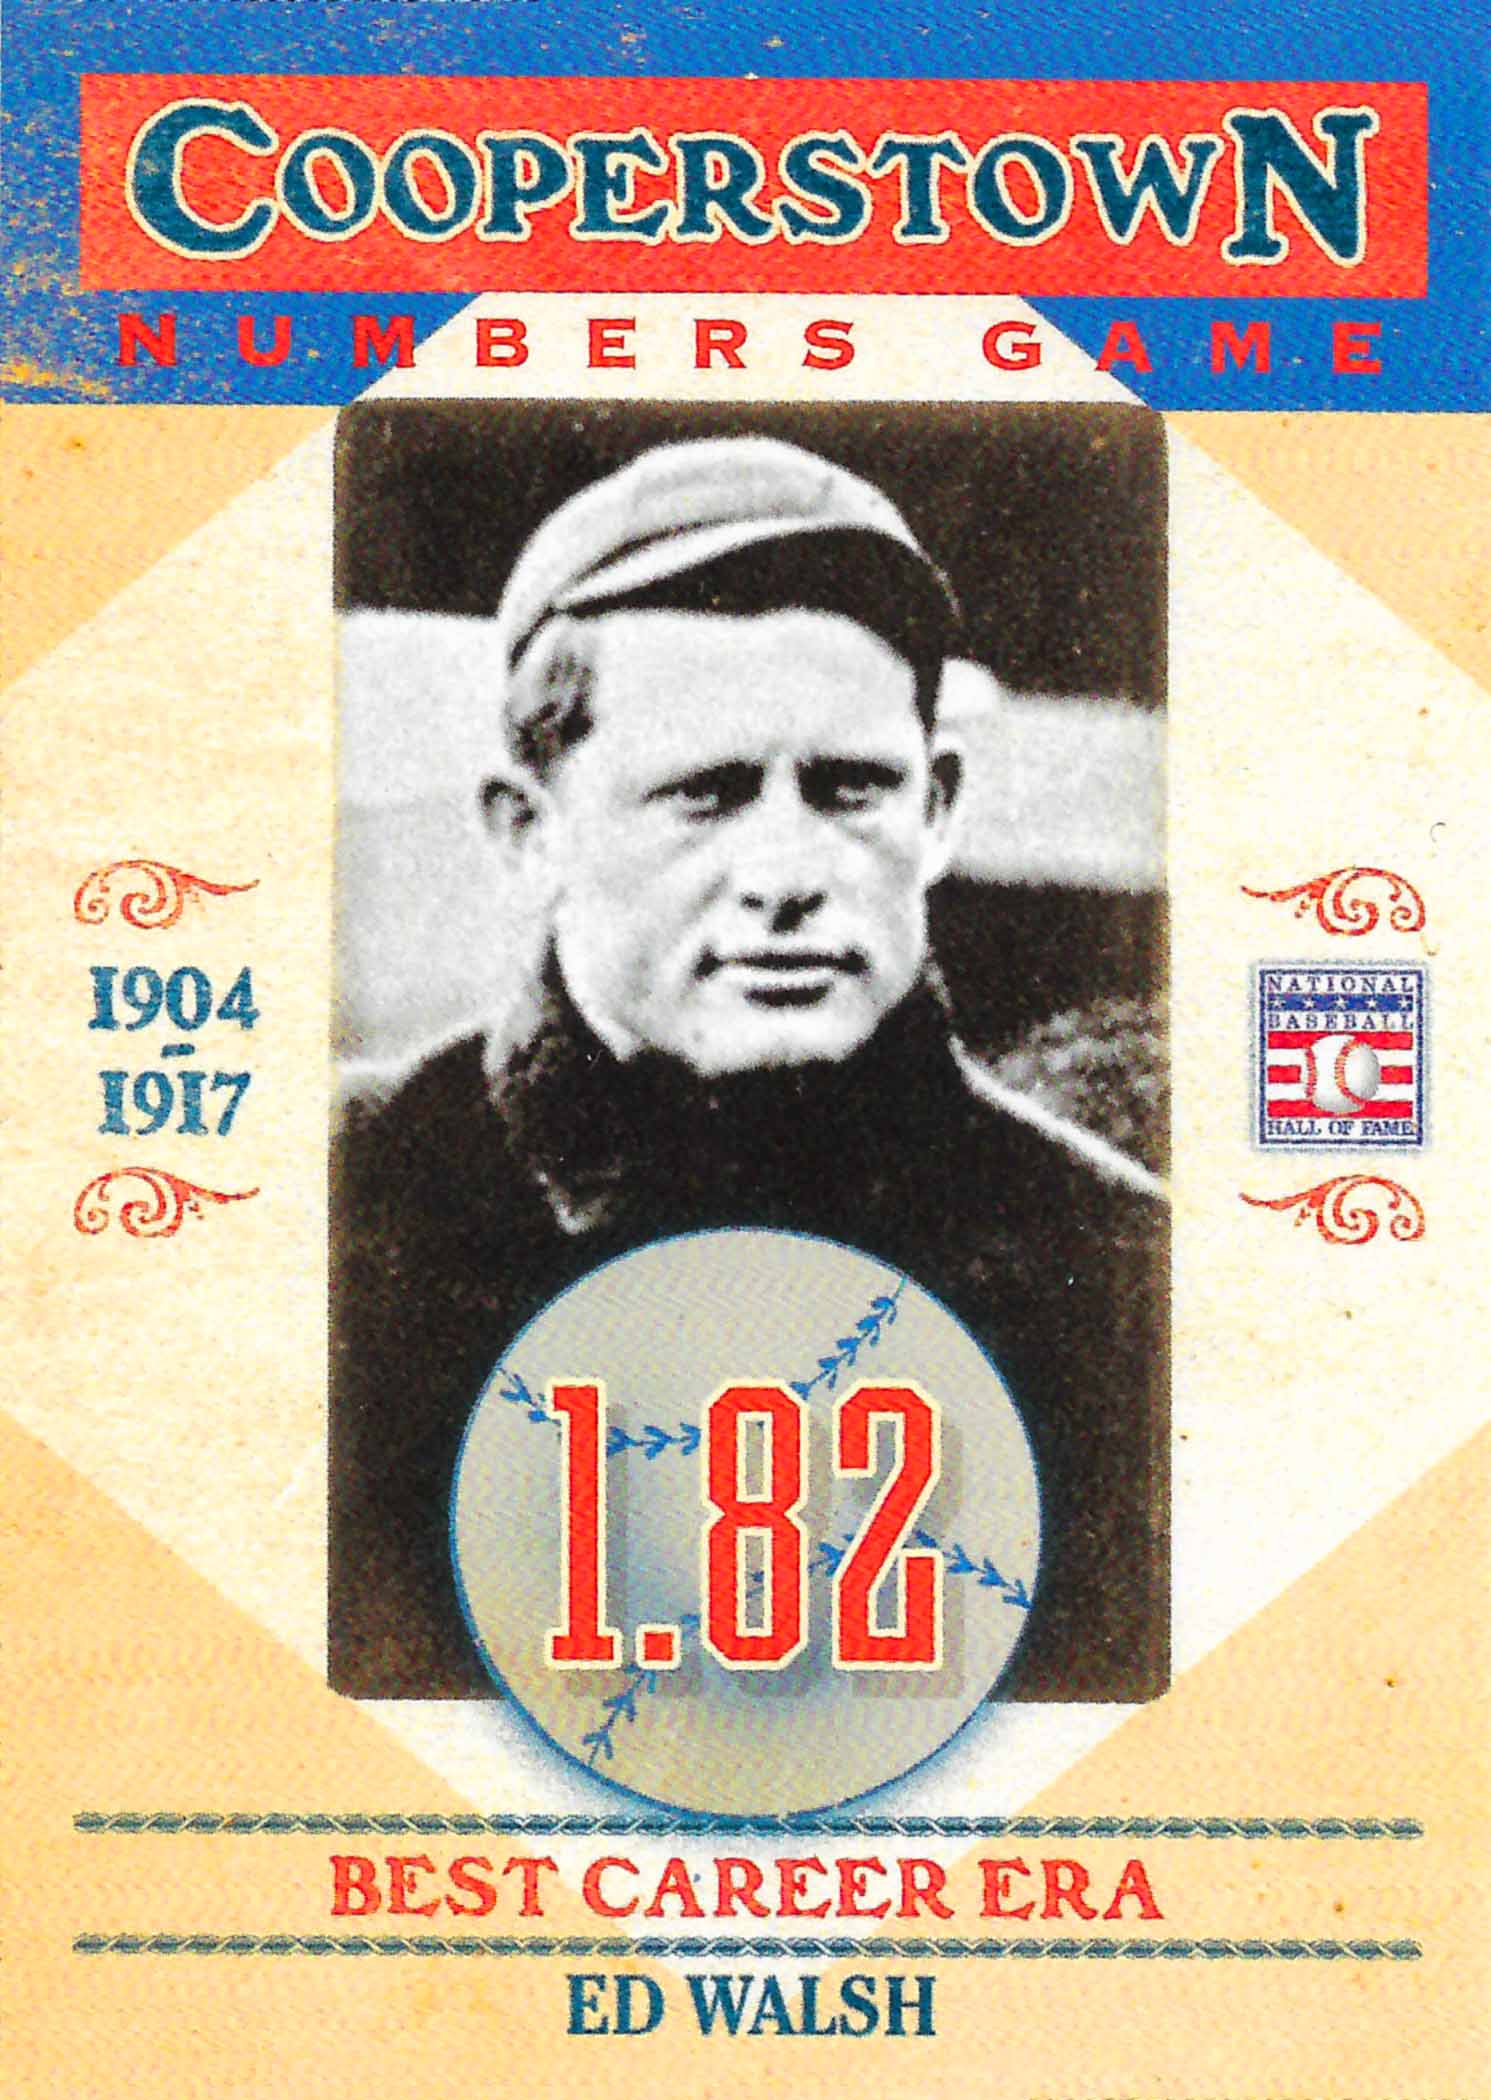 2013 Panini Cooperstown Numbers Game